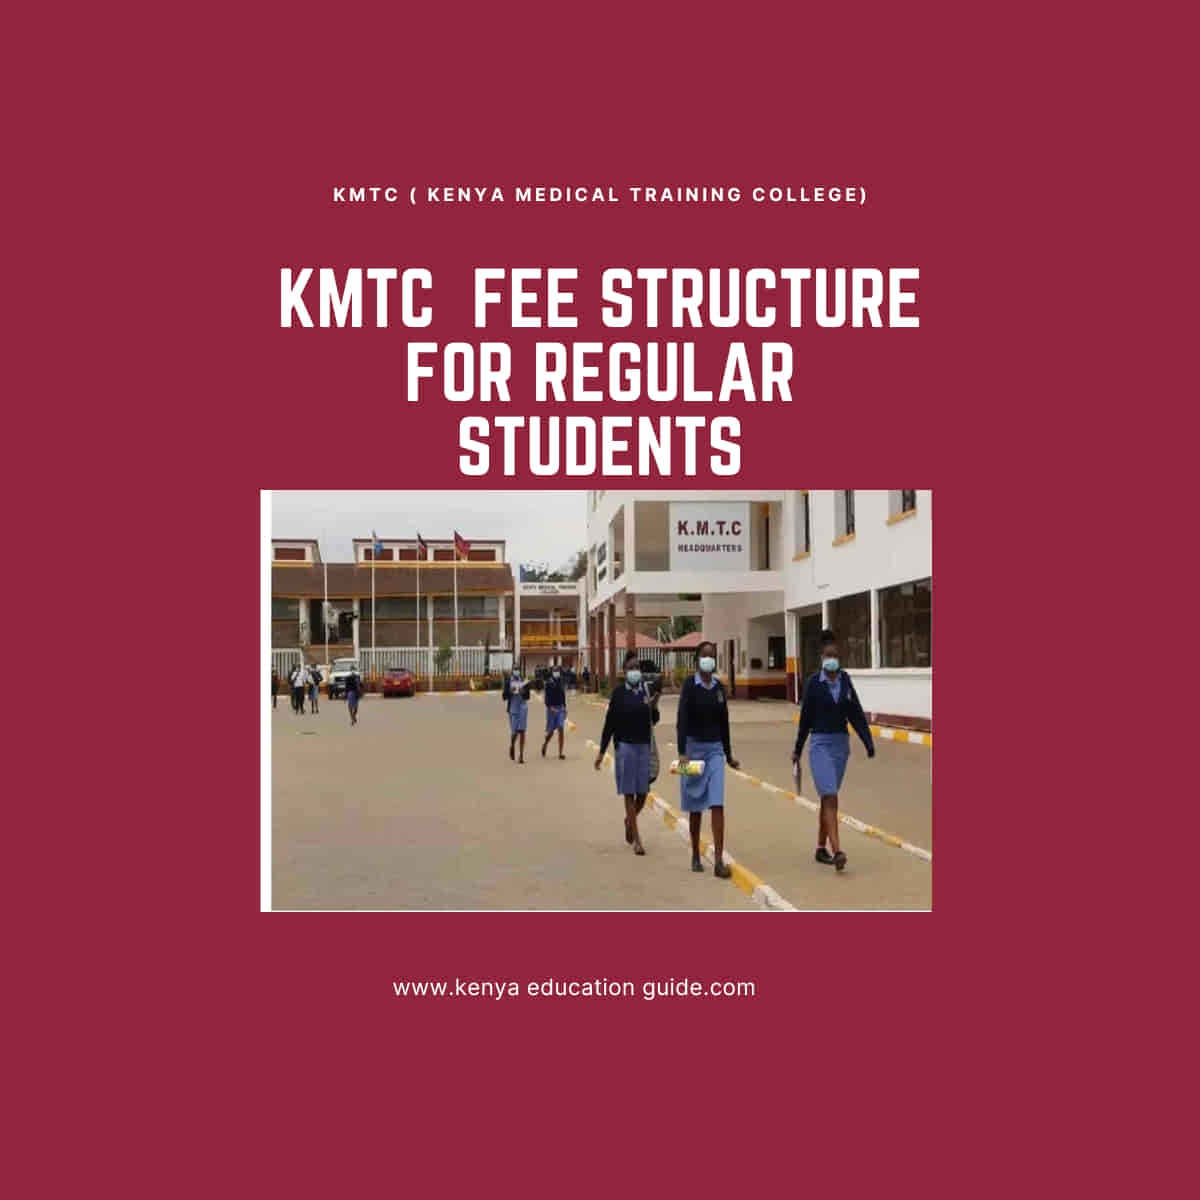 KMTC fee structure for regular students